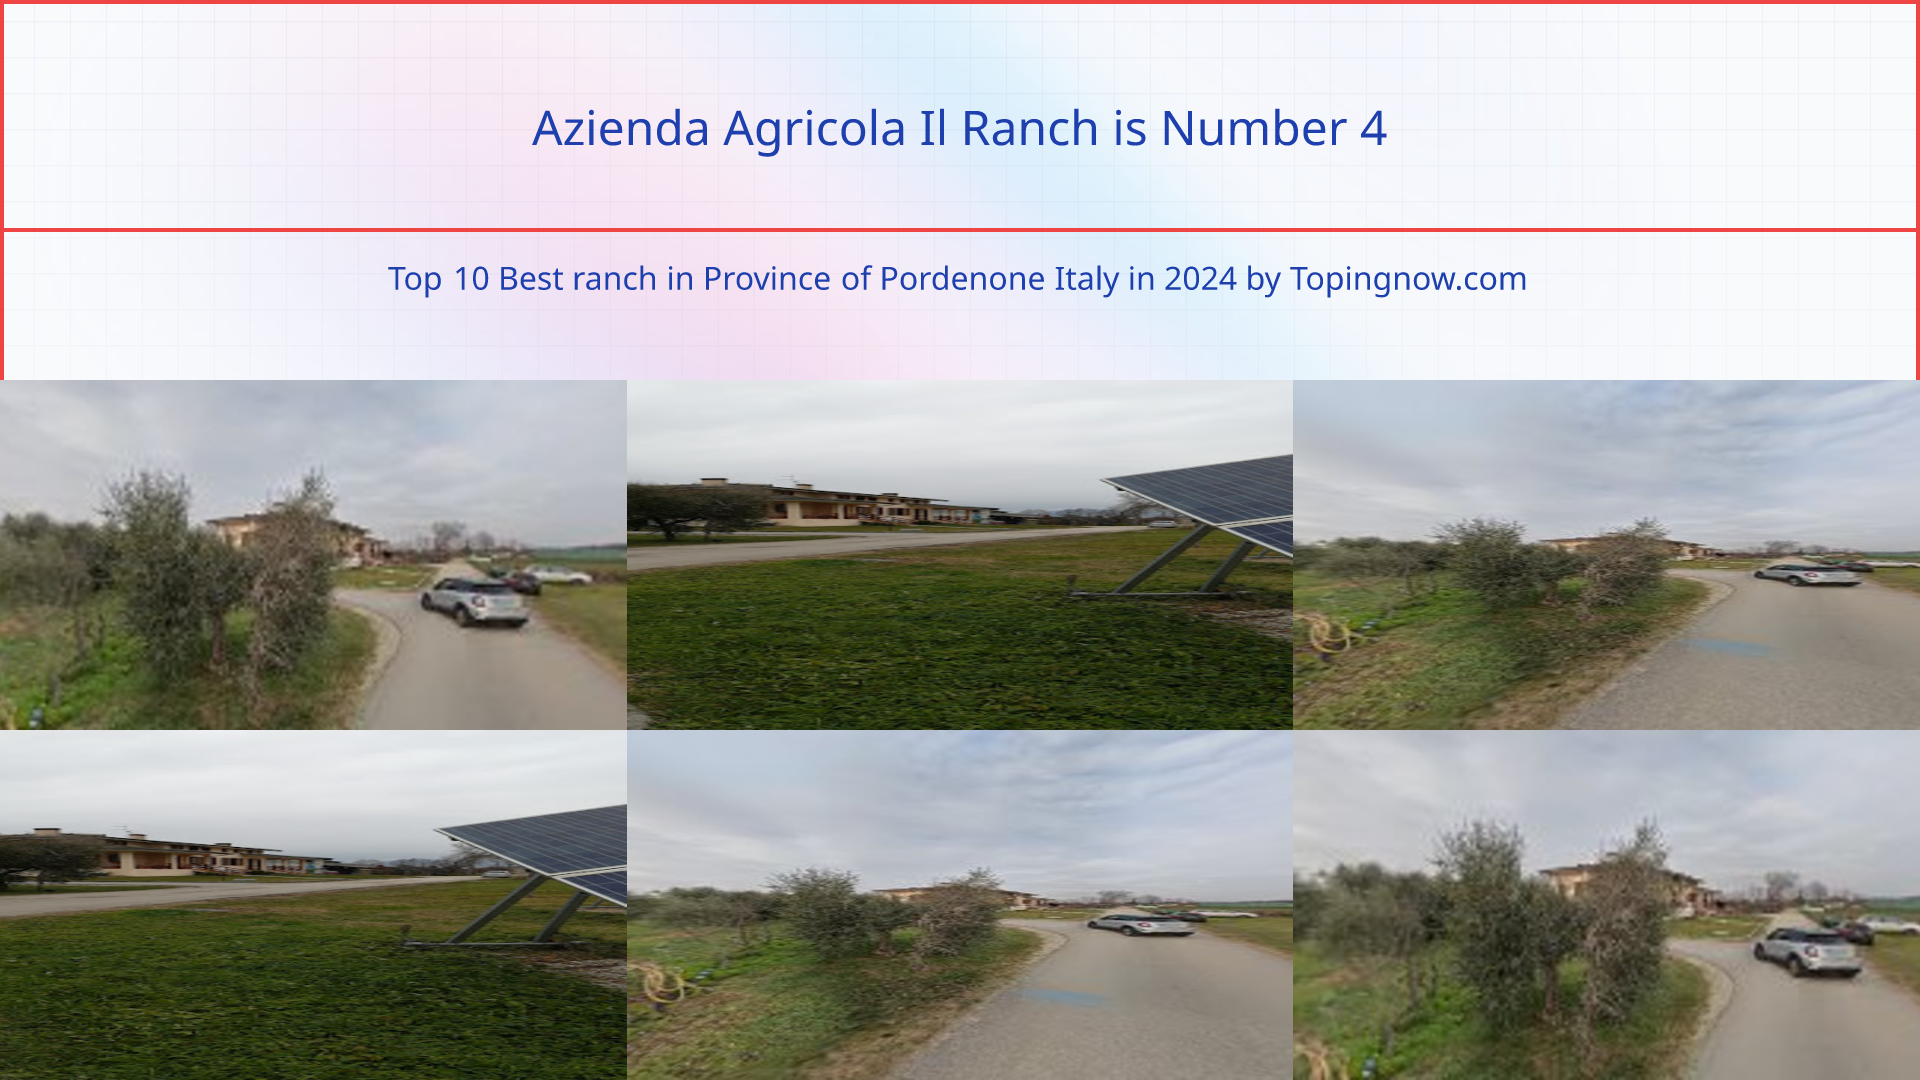 Azienda Agricola Il Ranch: Top 10 Best ranch in Province of Pordenone Italy in 2024